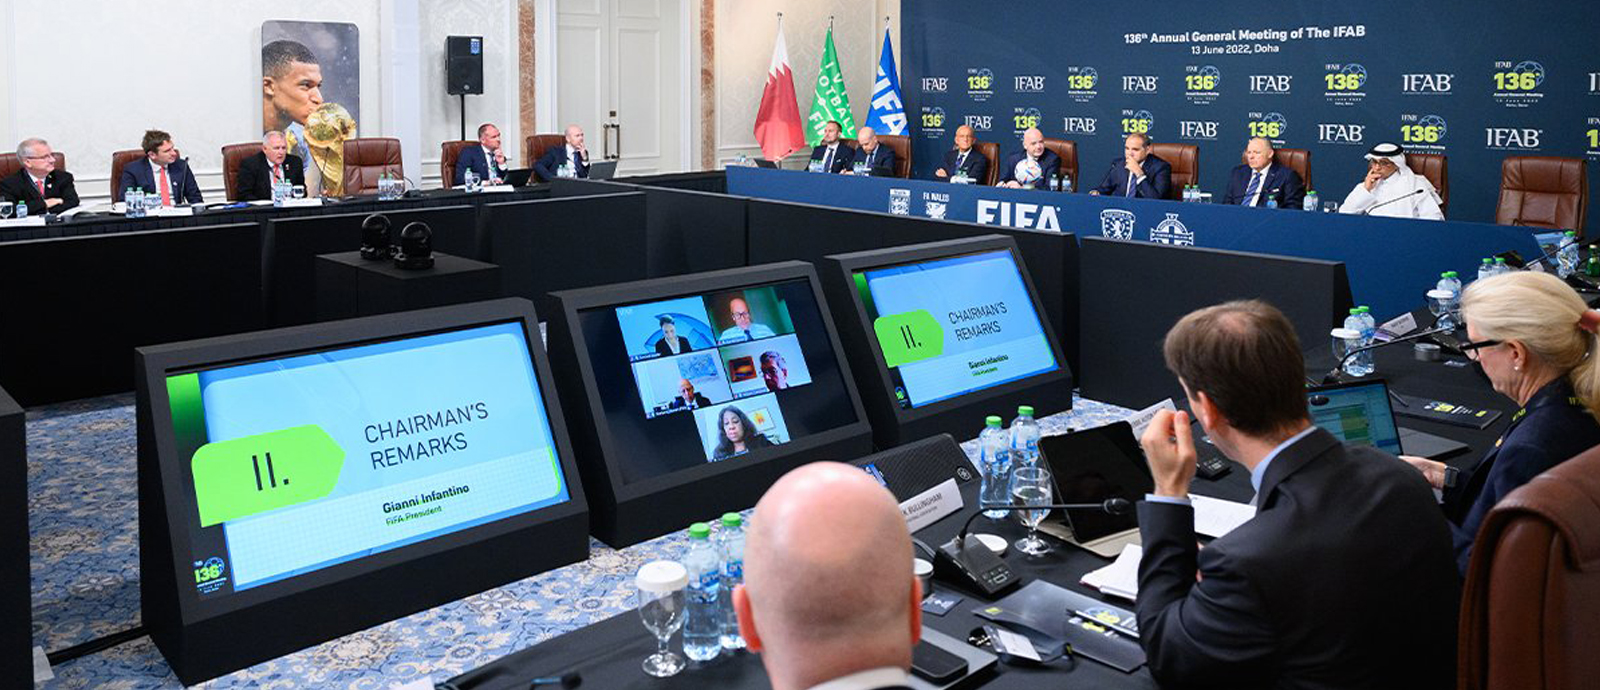 IFAB 136th Annual General Meeting